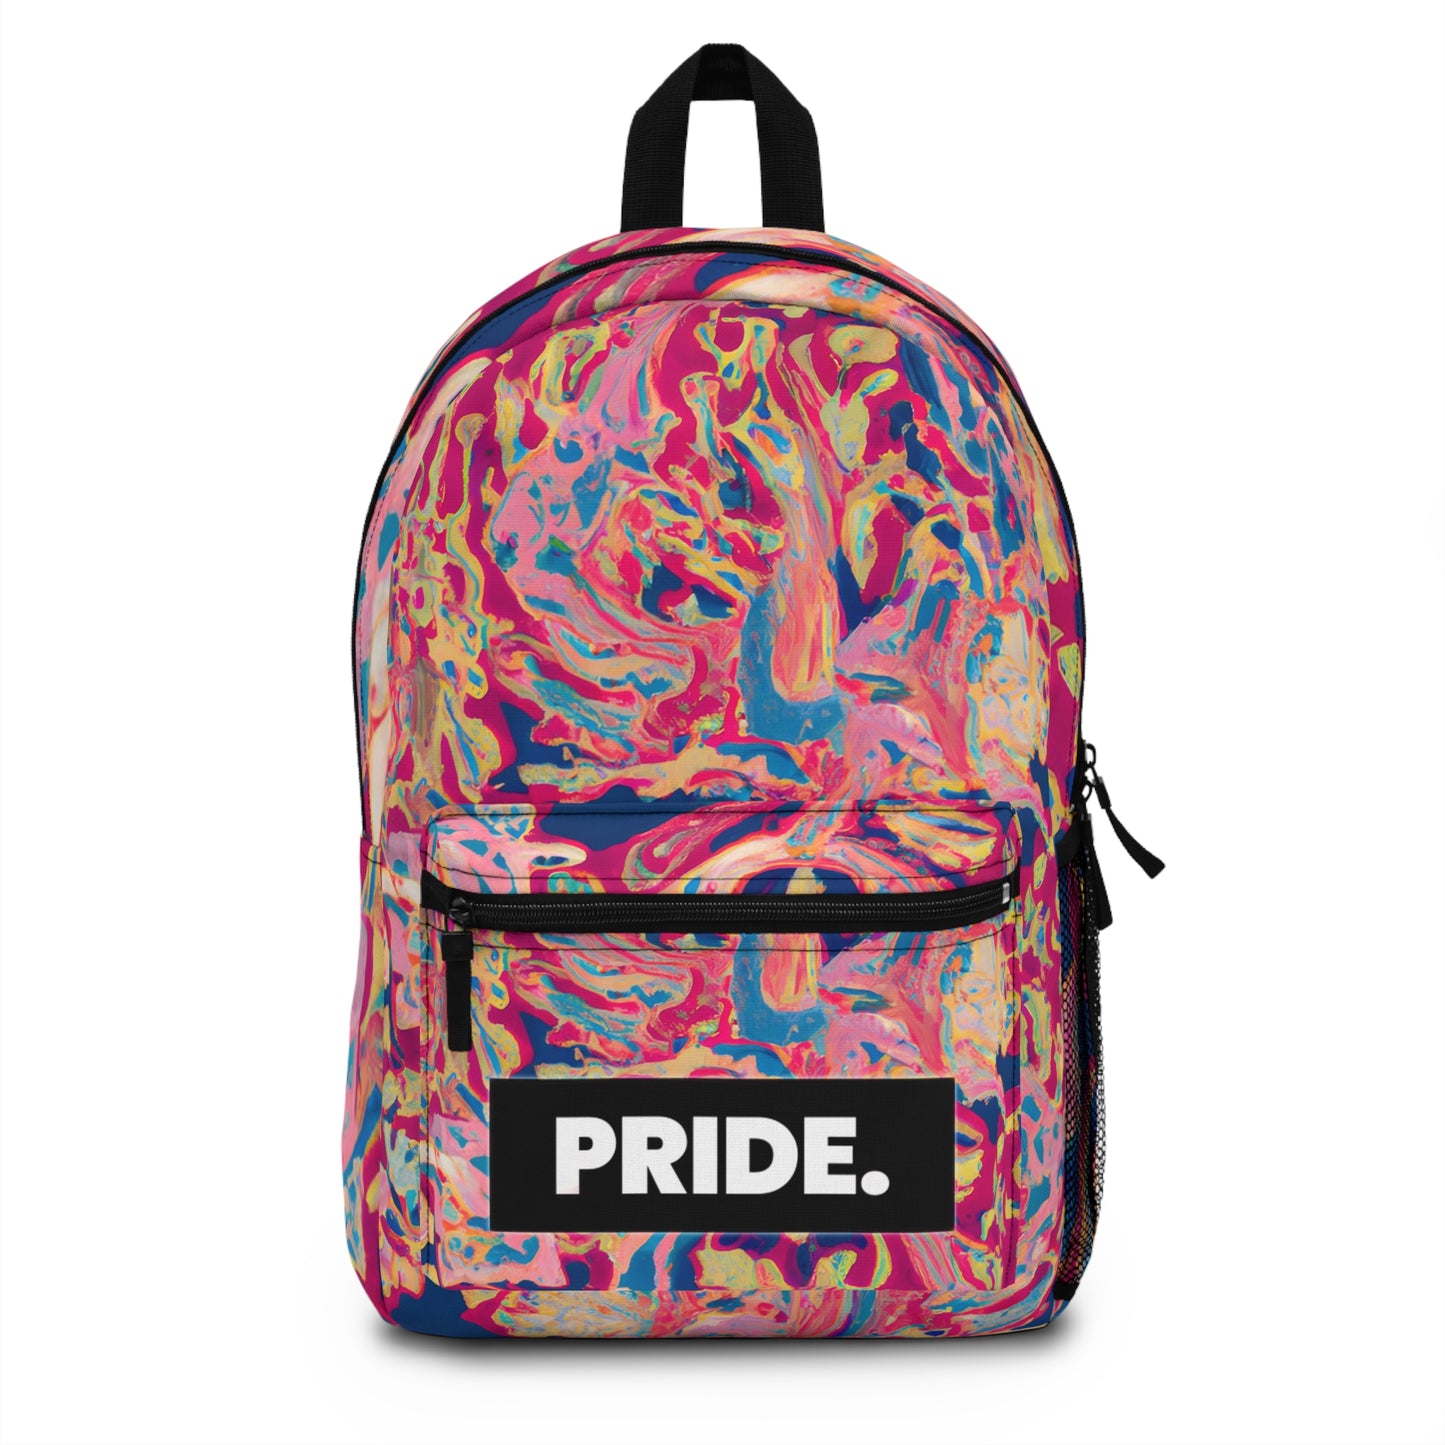 GlamourGee - Gay Pride Backpack